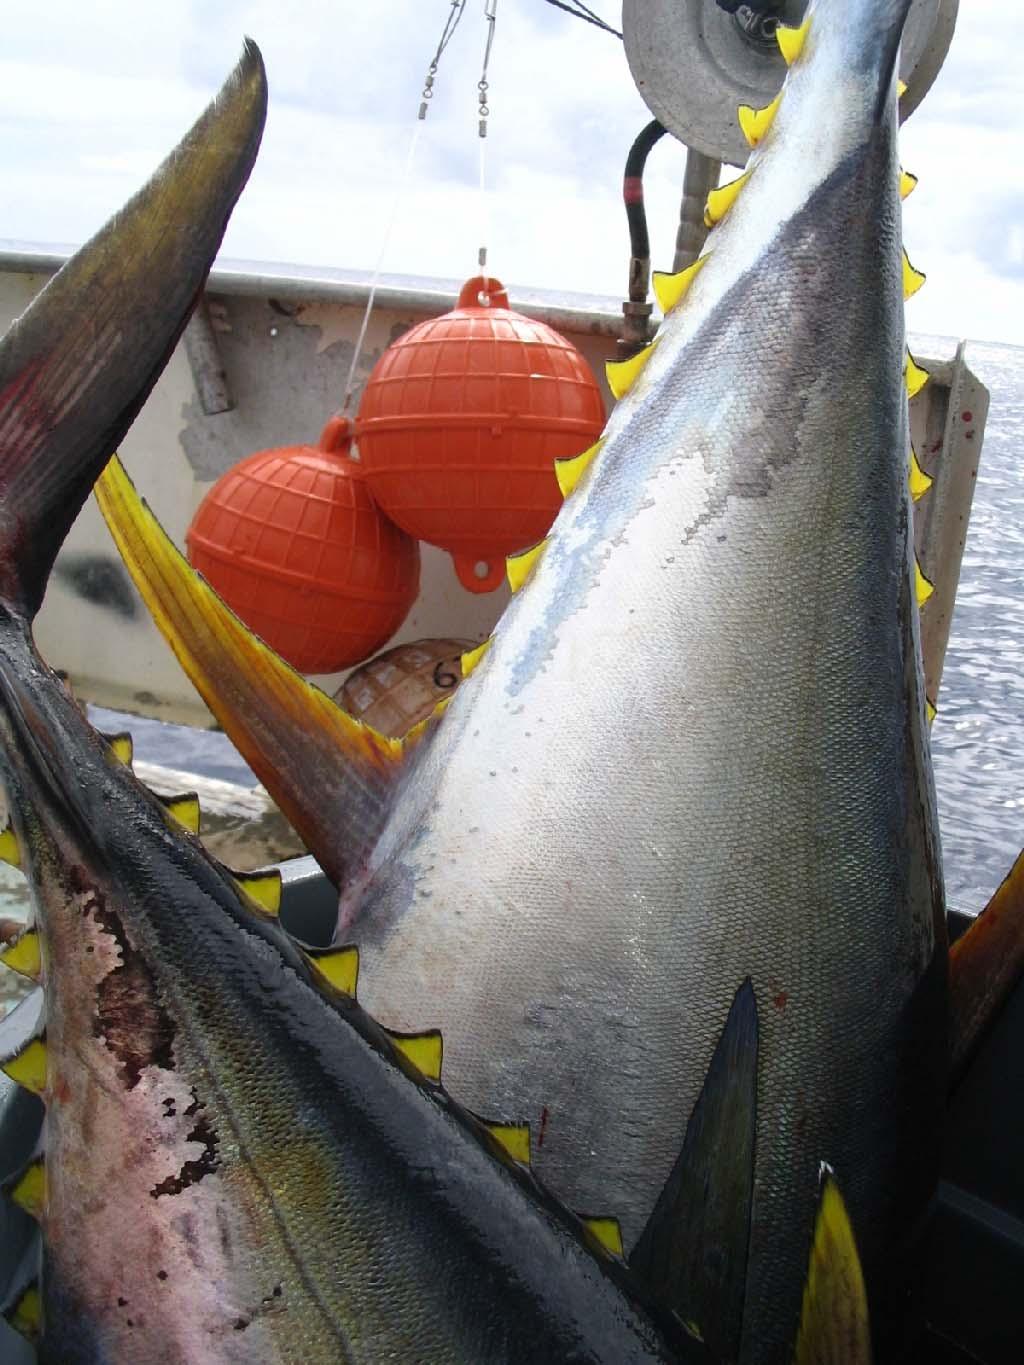 Finlet coloration - ideal Yellowfin bright yellow with